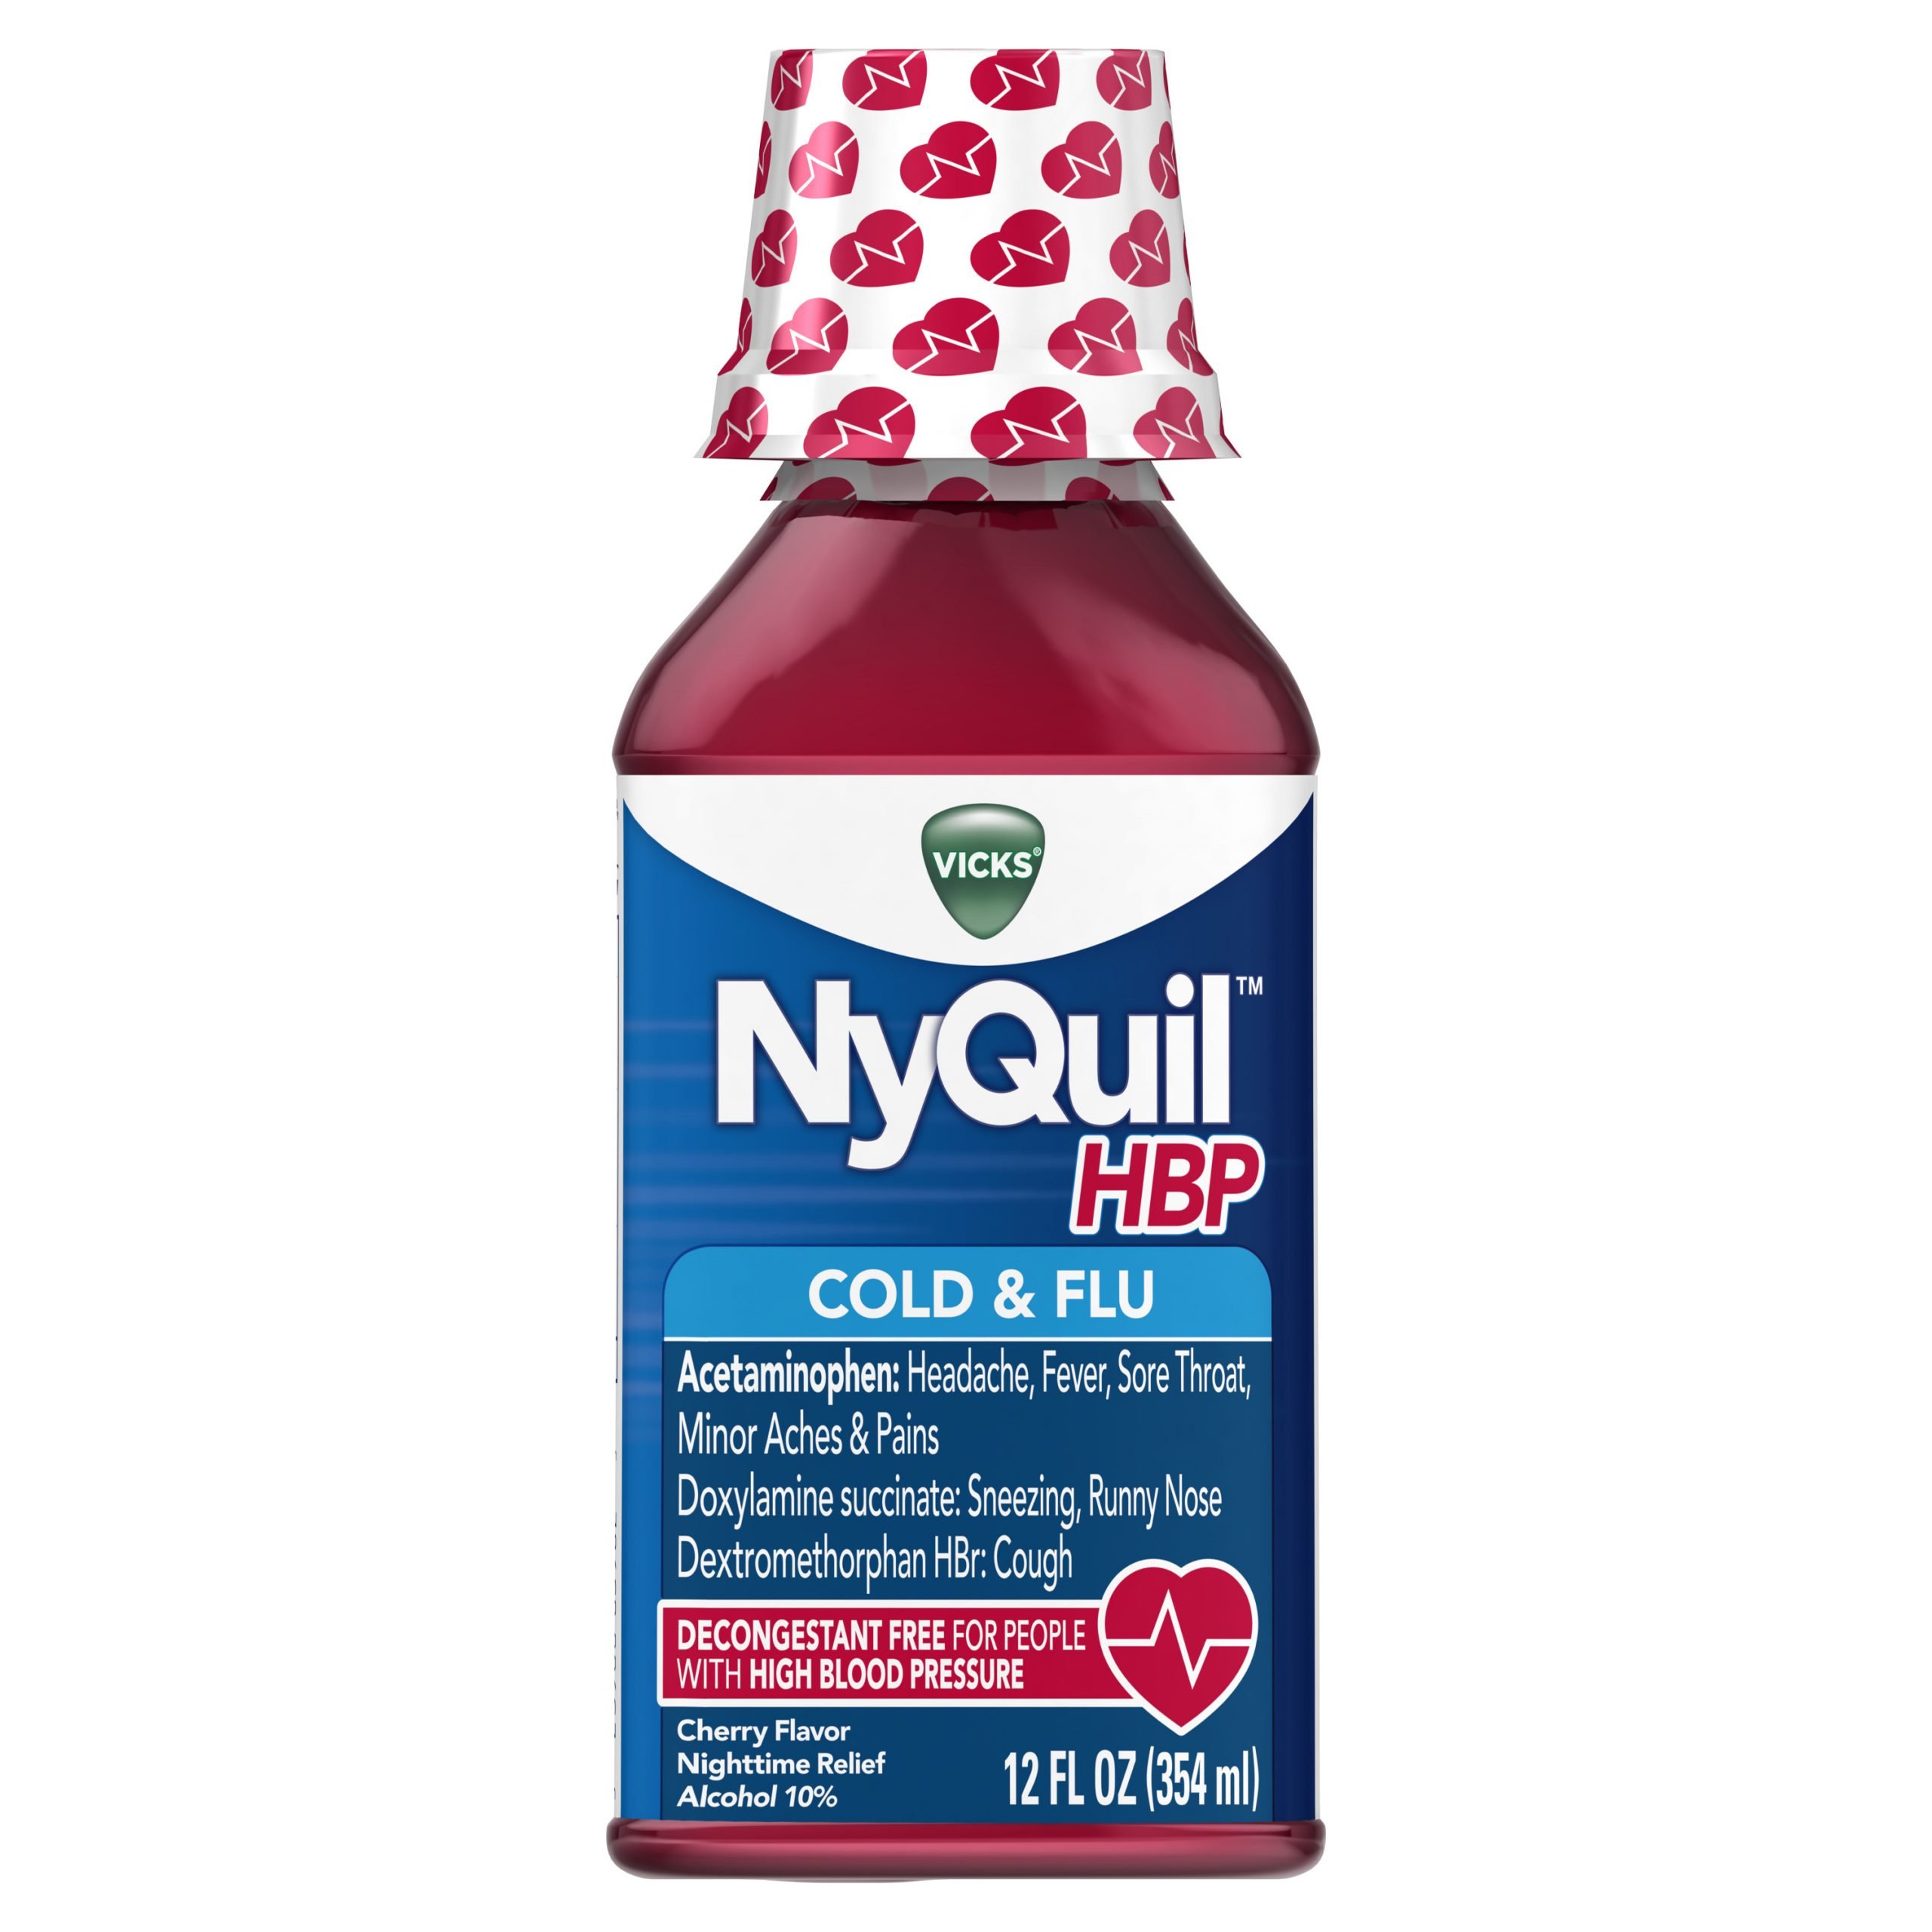 Vicks Nyquil High Blood Pressure Cold and Flu Medicine ...